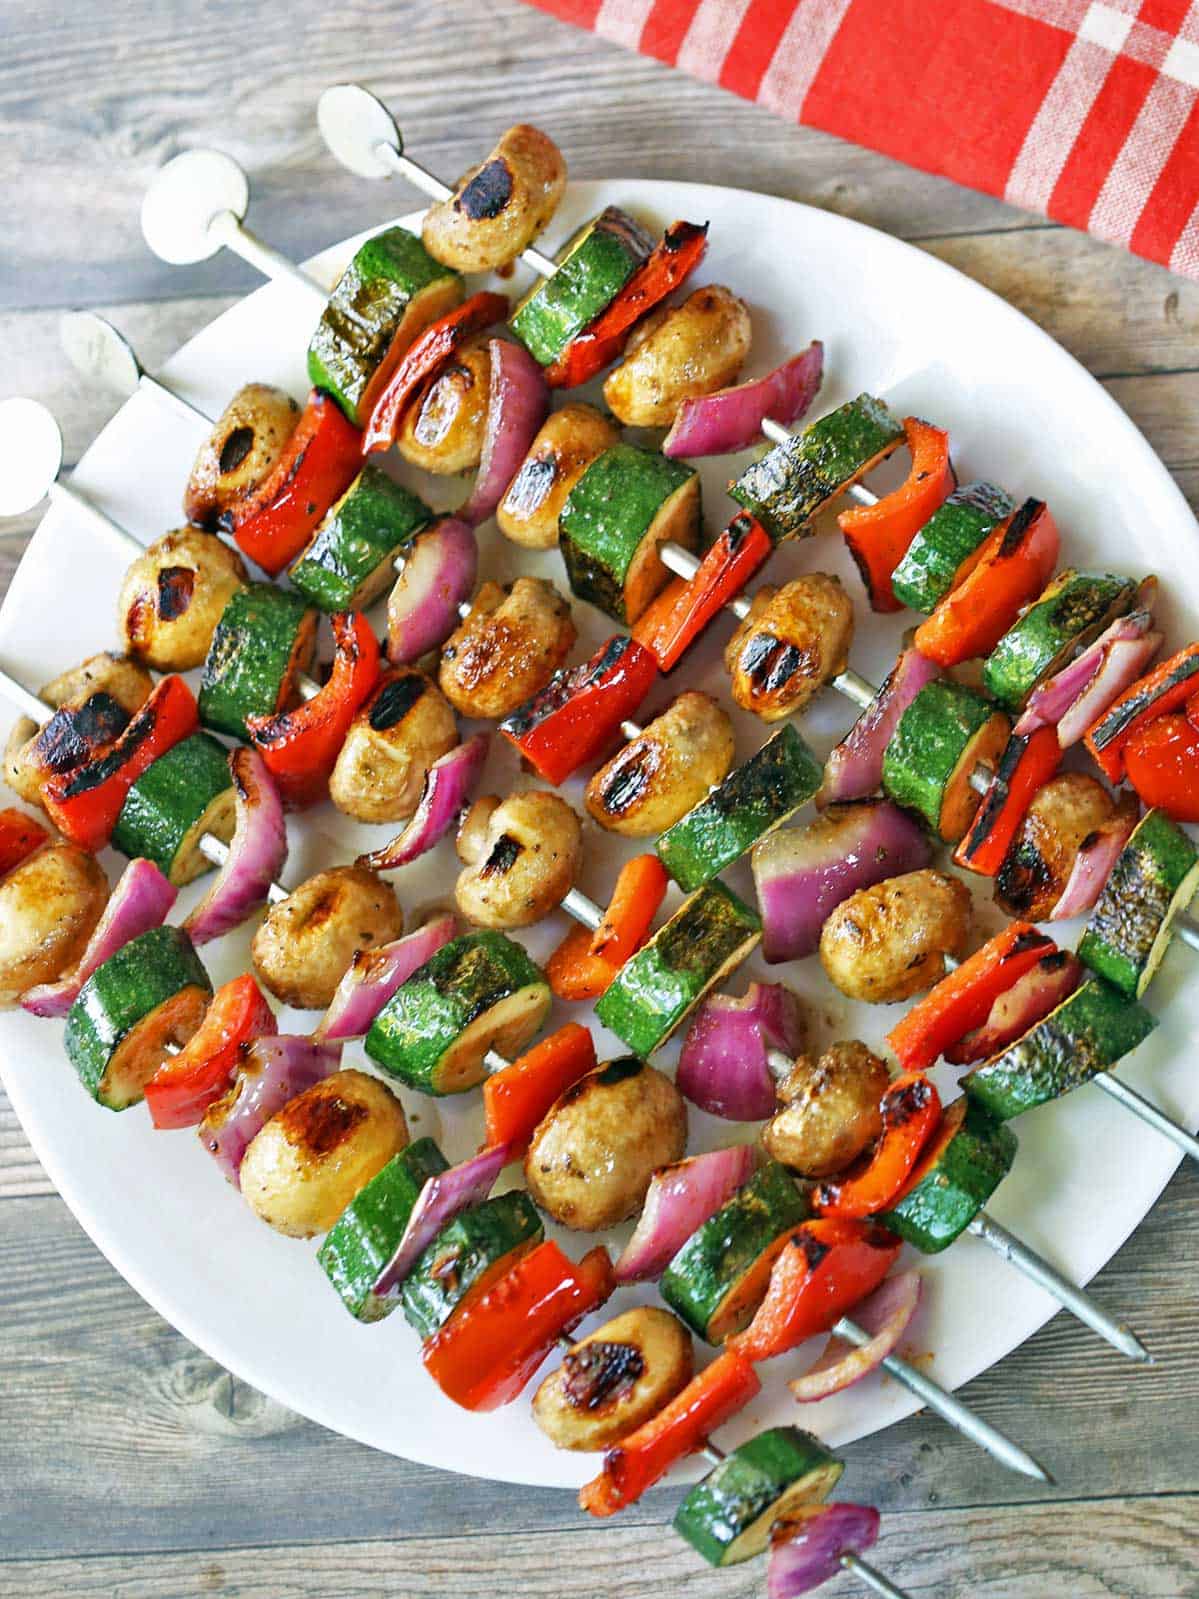 Vegetable kabobs are served on a white plate.